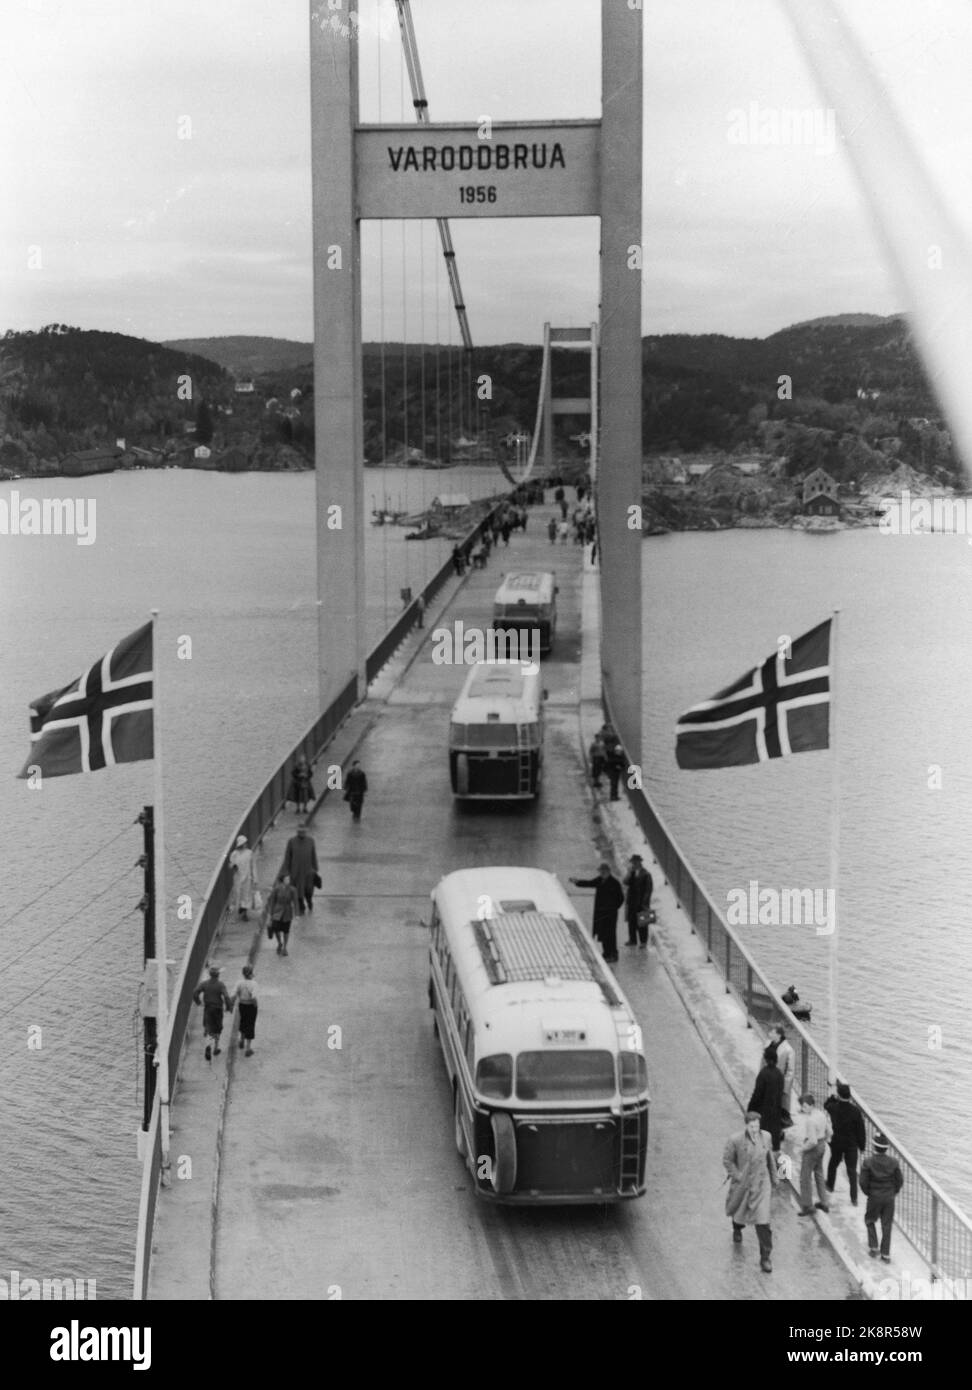 Kristiansand 195610 the largest in Northern Europe Opening of Varoddbrua at Kristiansand. The old Varoddbrua is a suspension bridge that goes over the outlet of the Topdalsfjord. The bridge is 618 meters long, and the largest span is 337 meters with free height 32 meters. The bridge has 8 buckles. The Varodd bridge was opened on October 20, 1956 and was toll -funded. It was Norway's longest suspension bridge until 1972. Photo: Current / NTB Stock Photo